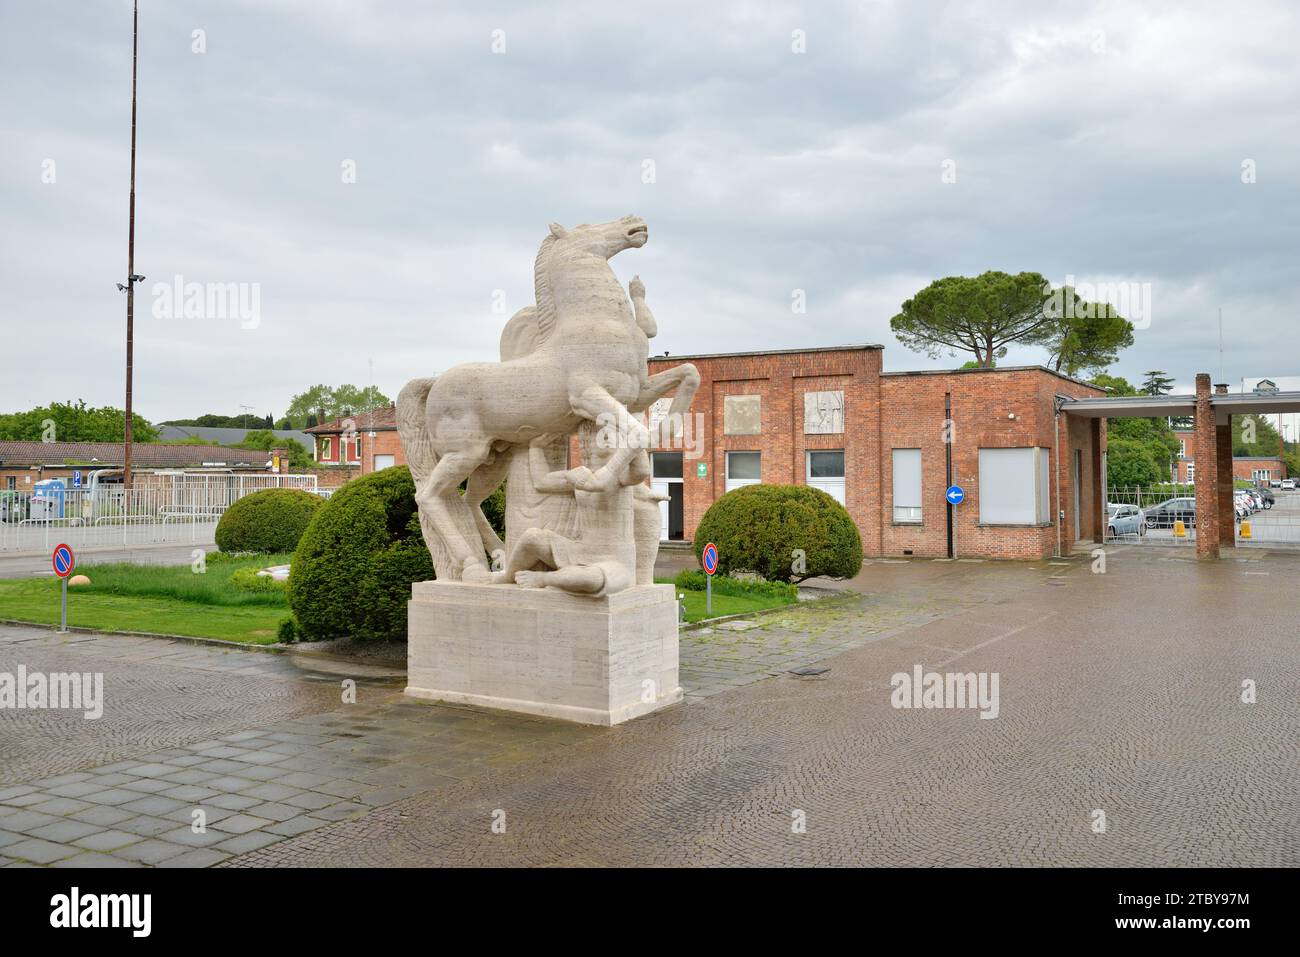 Torviscosa, Italy - The main building and rear side of statue located at the entrance Stock Photo